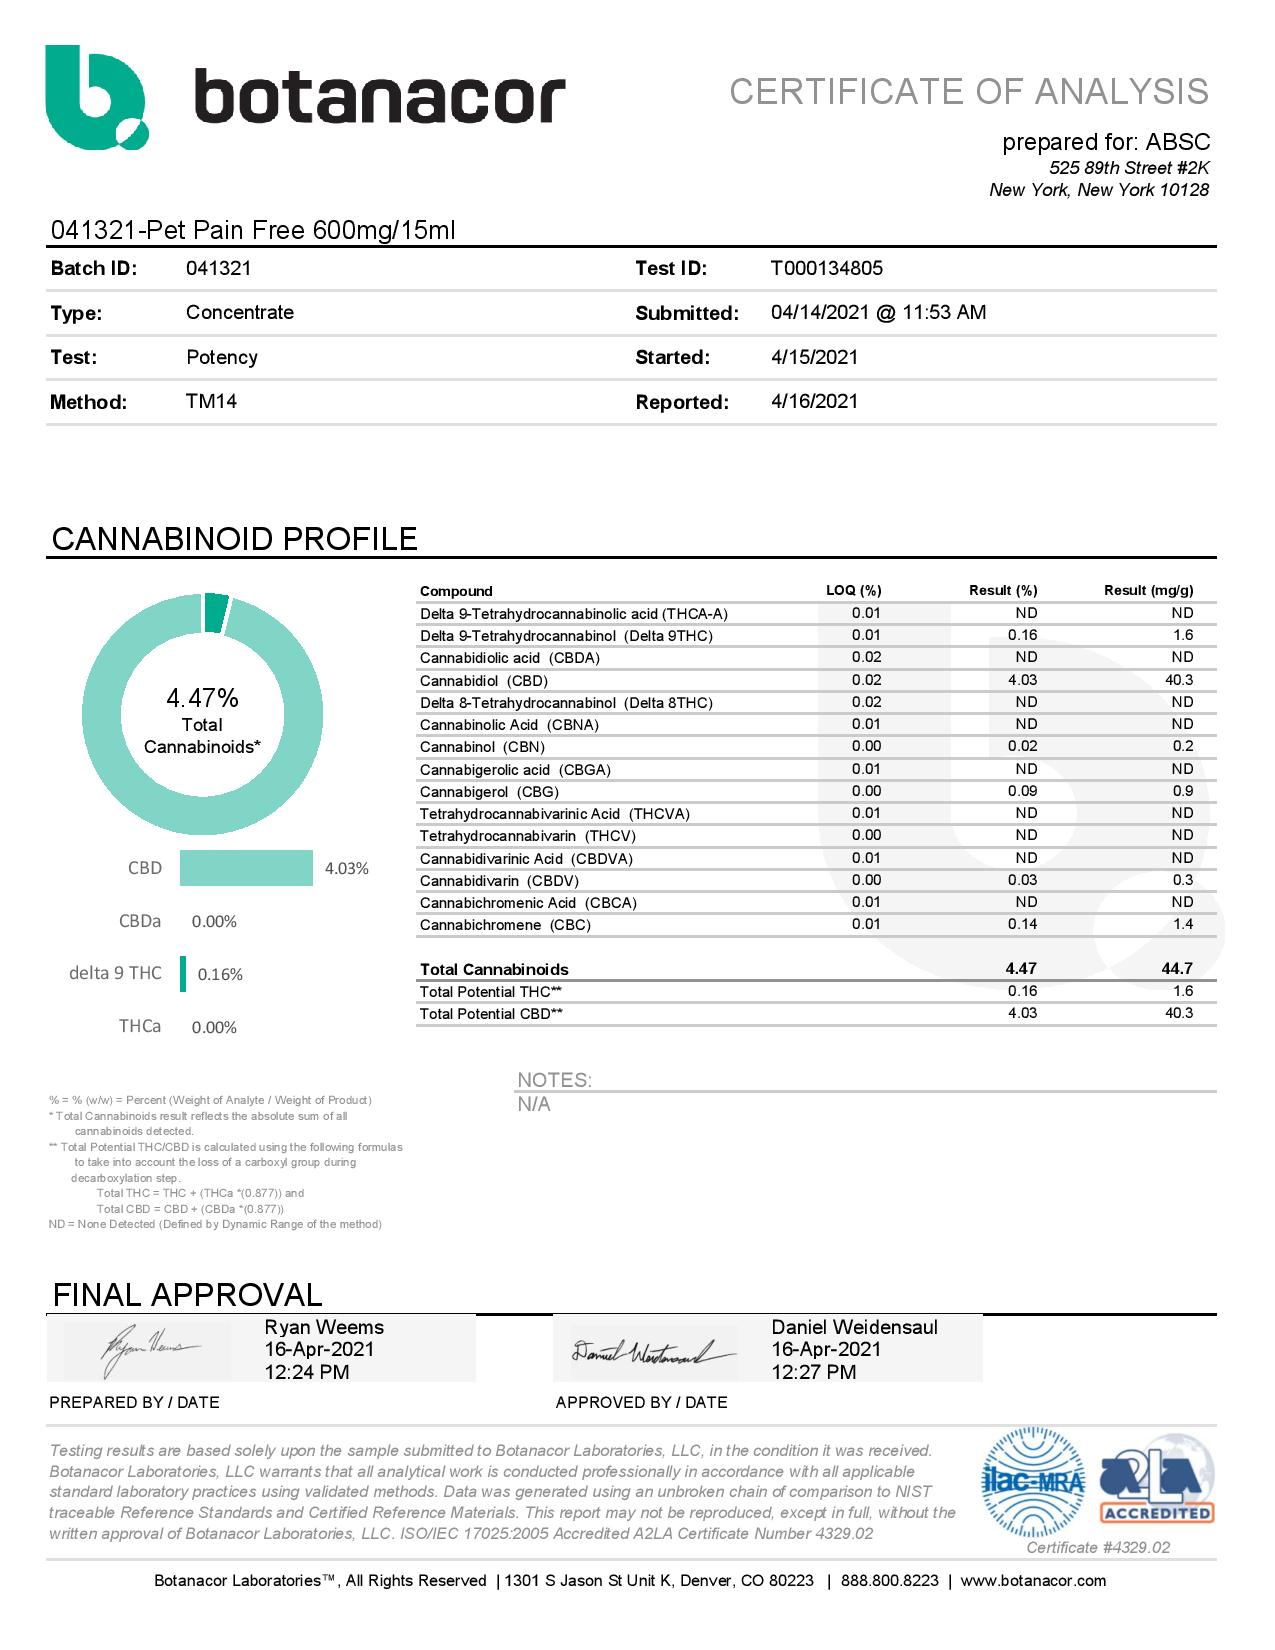 Applied Basic Science 600mg CBD oil certificate of analysis batch 041321